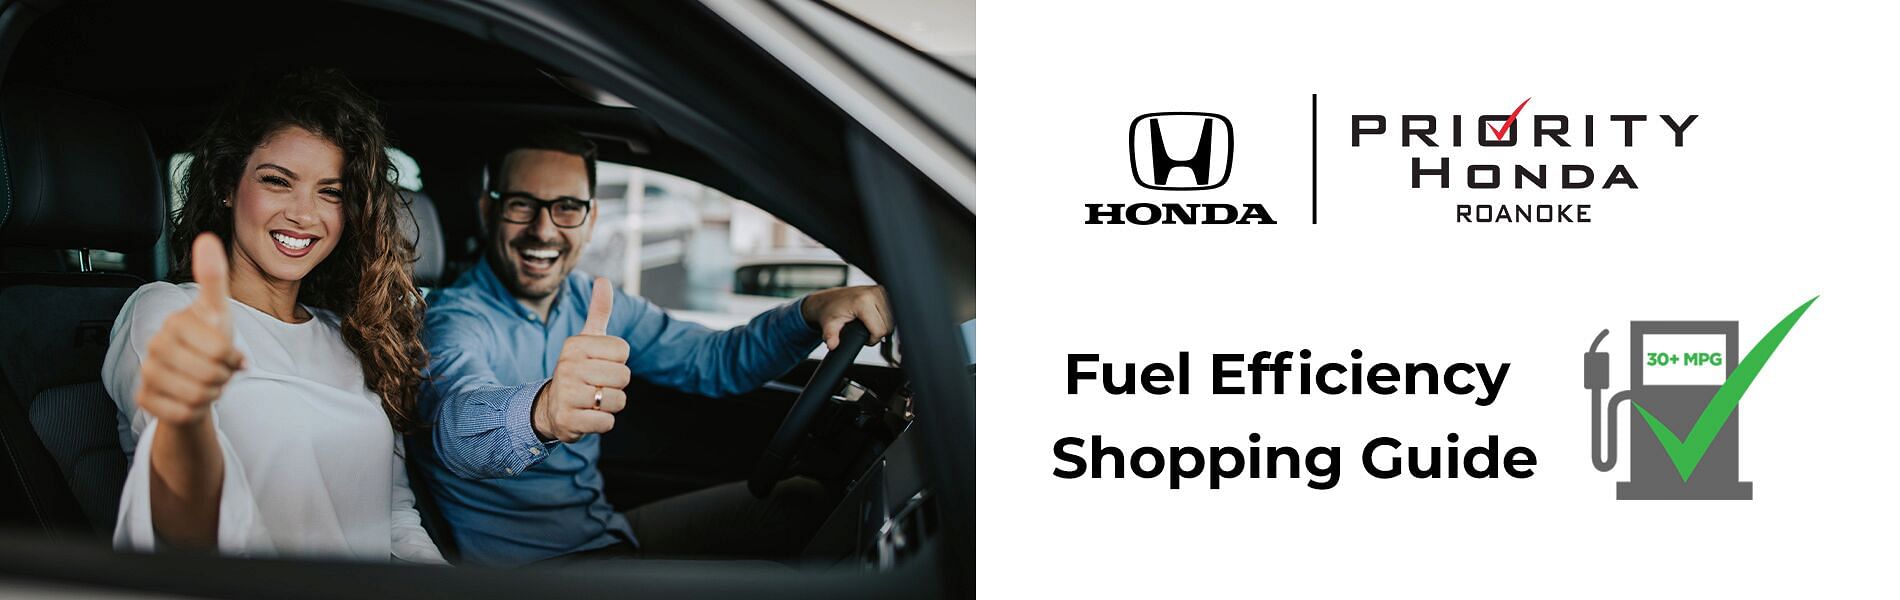 On the left, a smiling woman and a man showing a thumbs up, on the right priority honda roanoke logo and black text fuel efficiency shopping guide on the white background